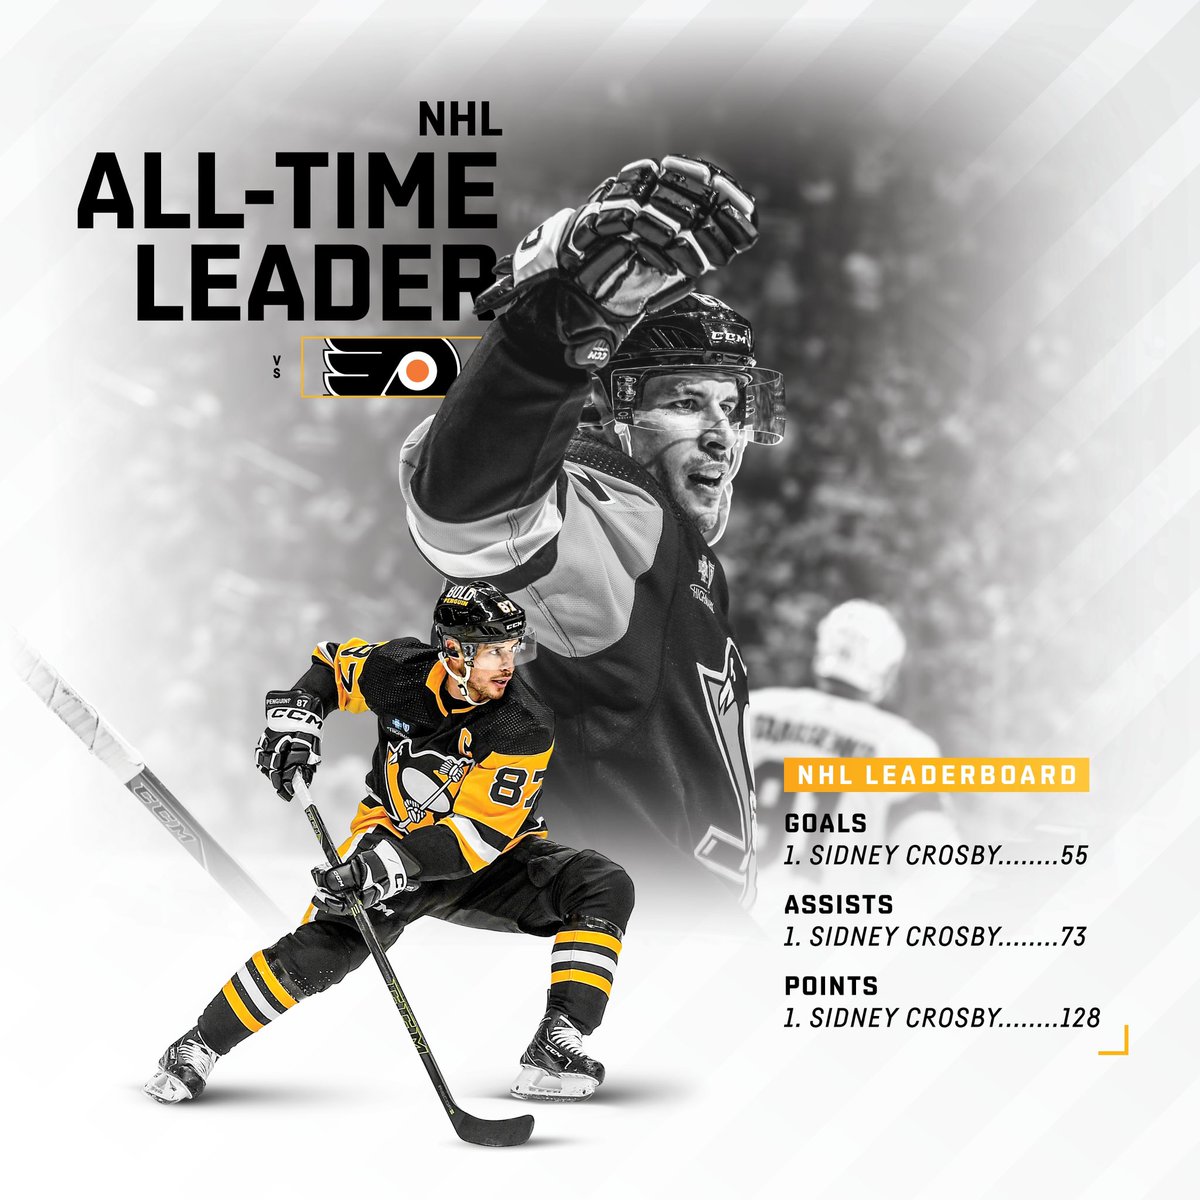 Pick a category, any category - Sidney Crosby is the all-time leader in NHL history in goals, assists and points against the Flyers 😎